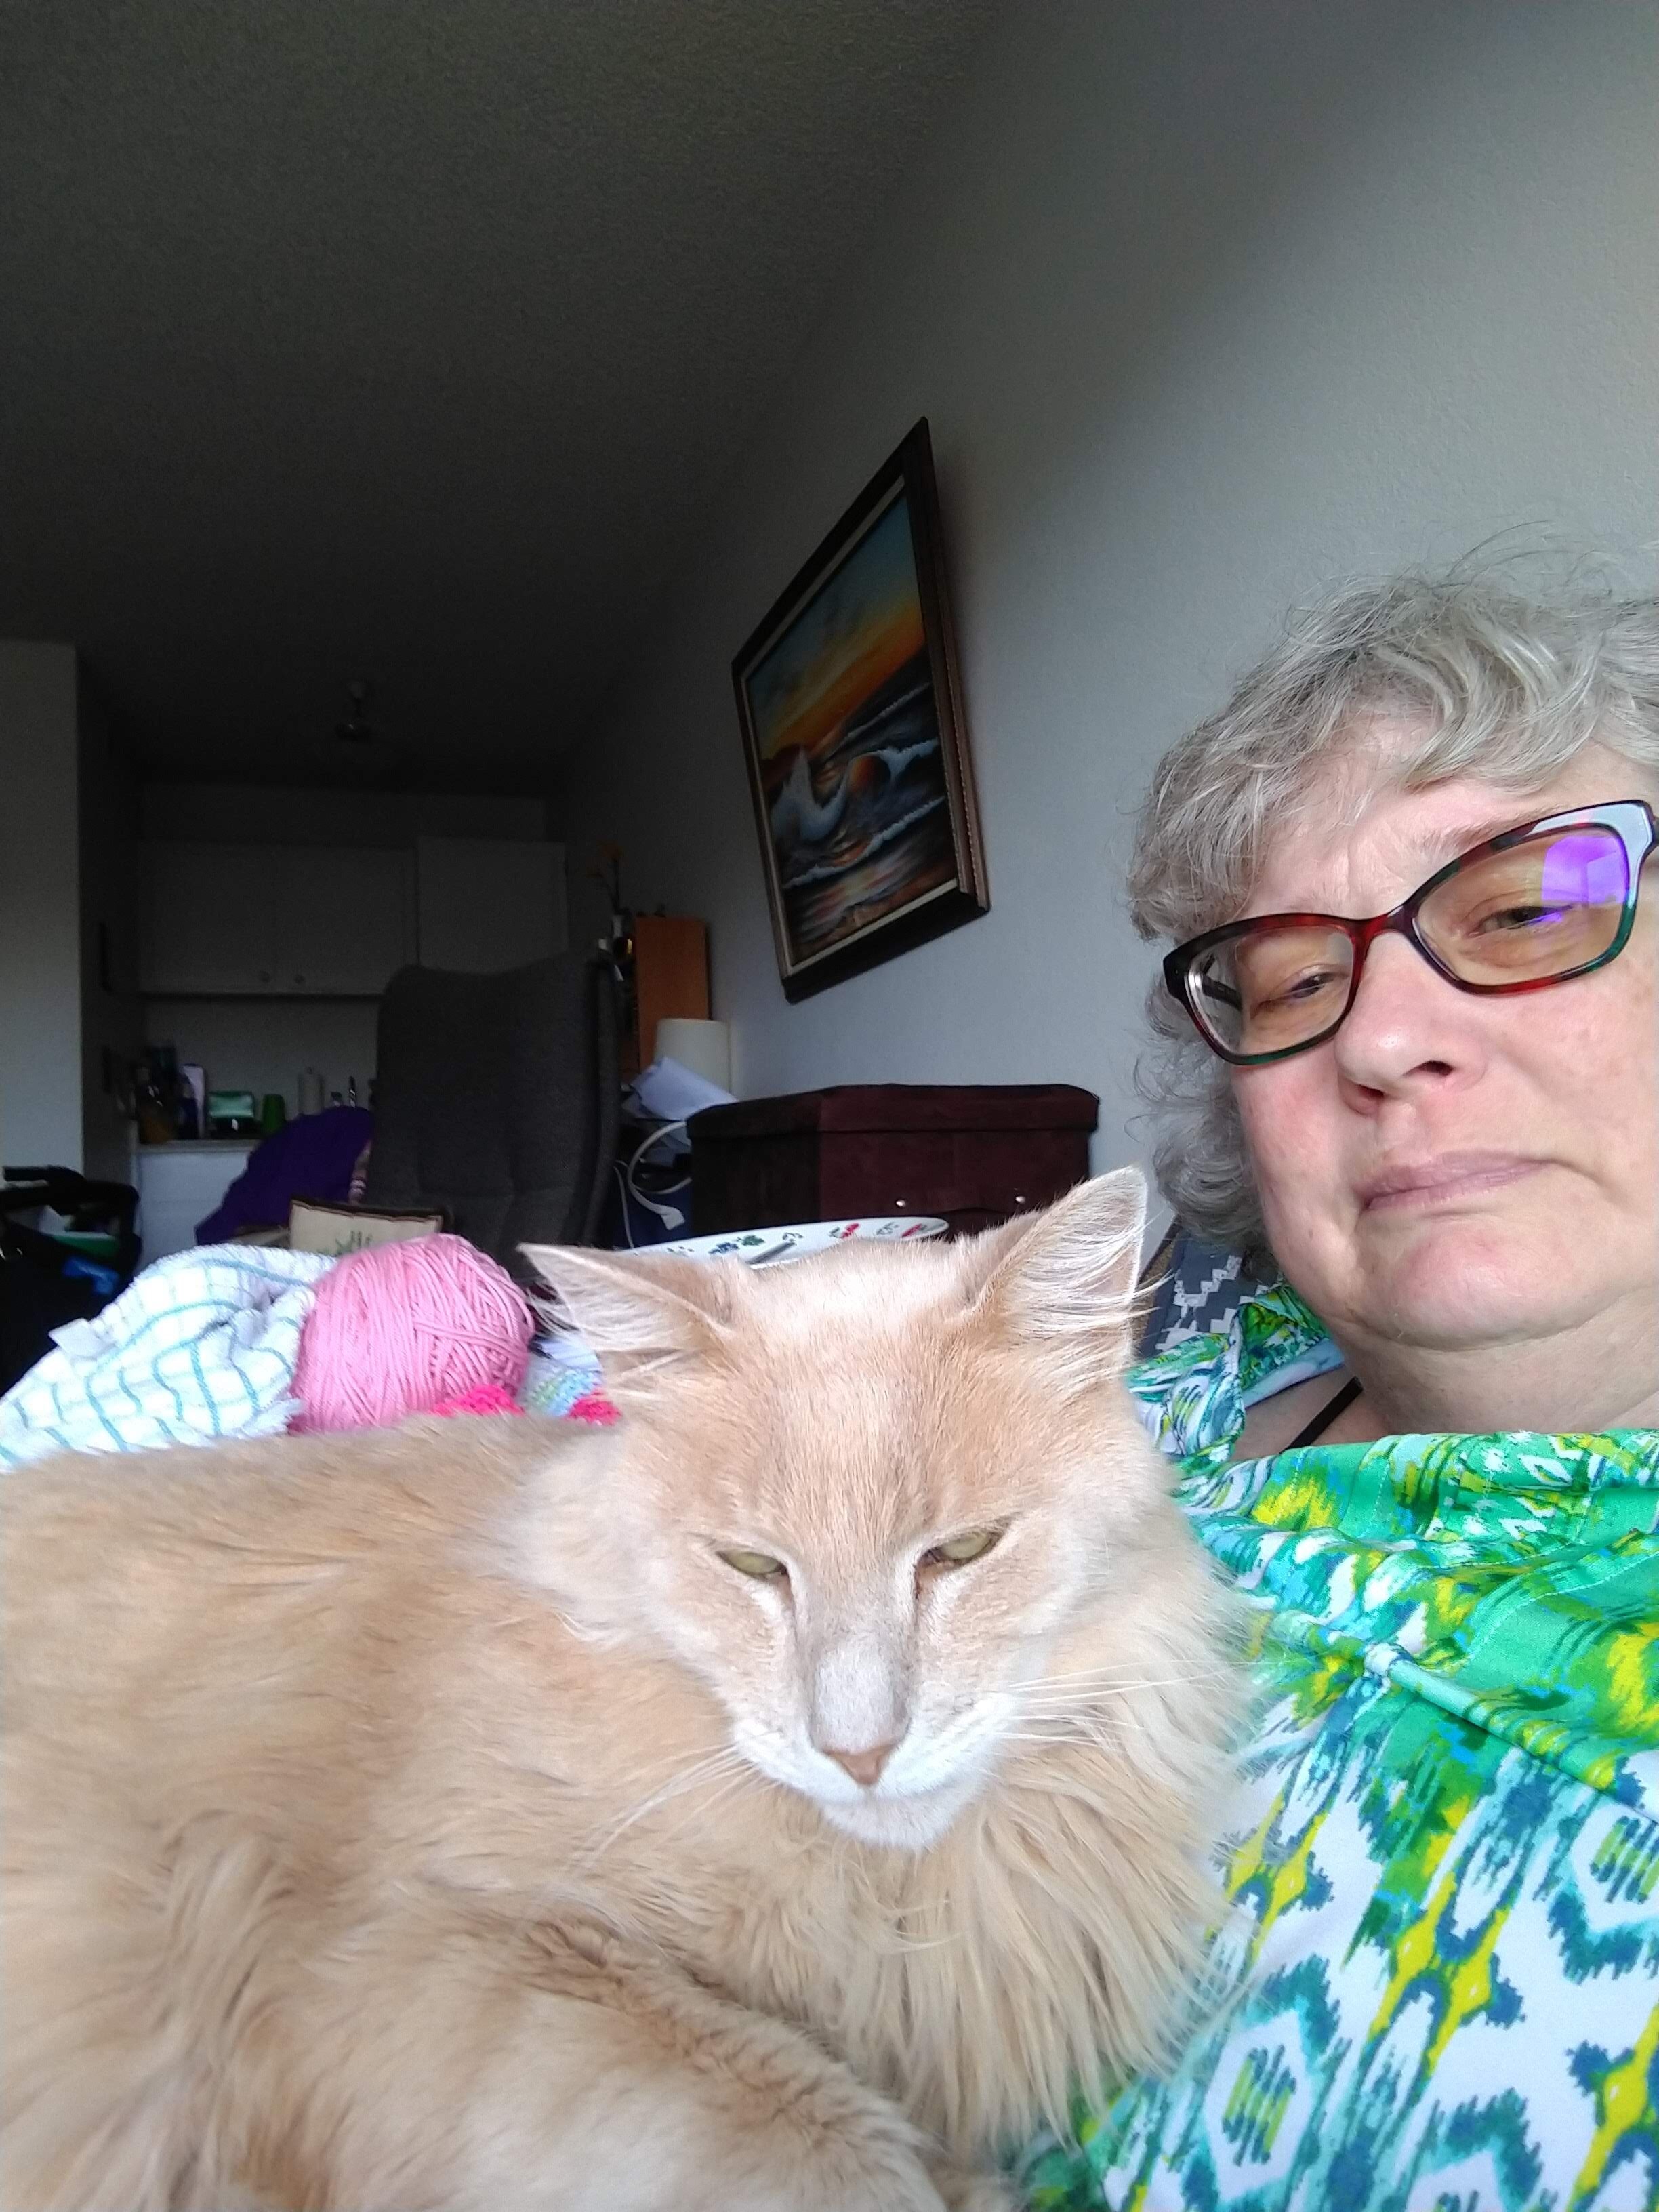 An image of the blog author and her cat sitting inside.